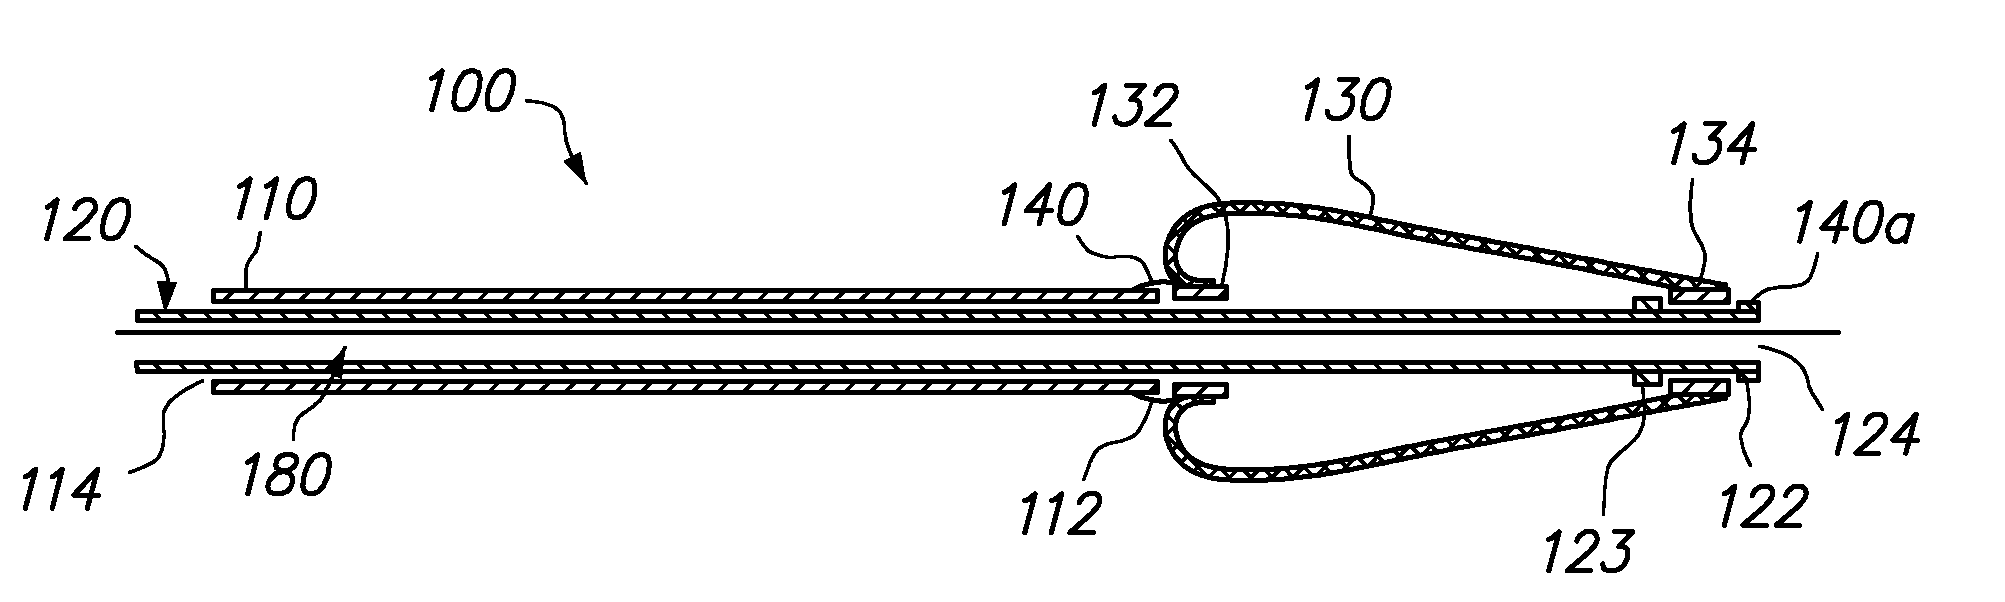 Occlusive Cinching Devices and Methods of Use